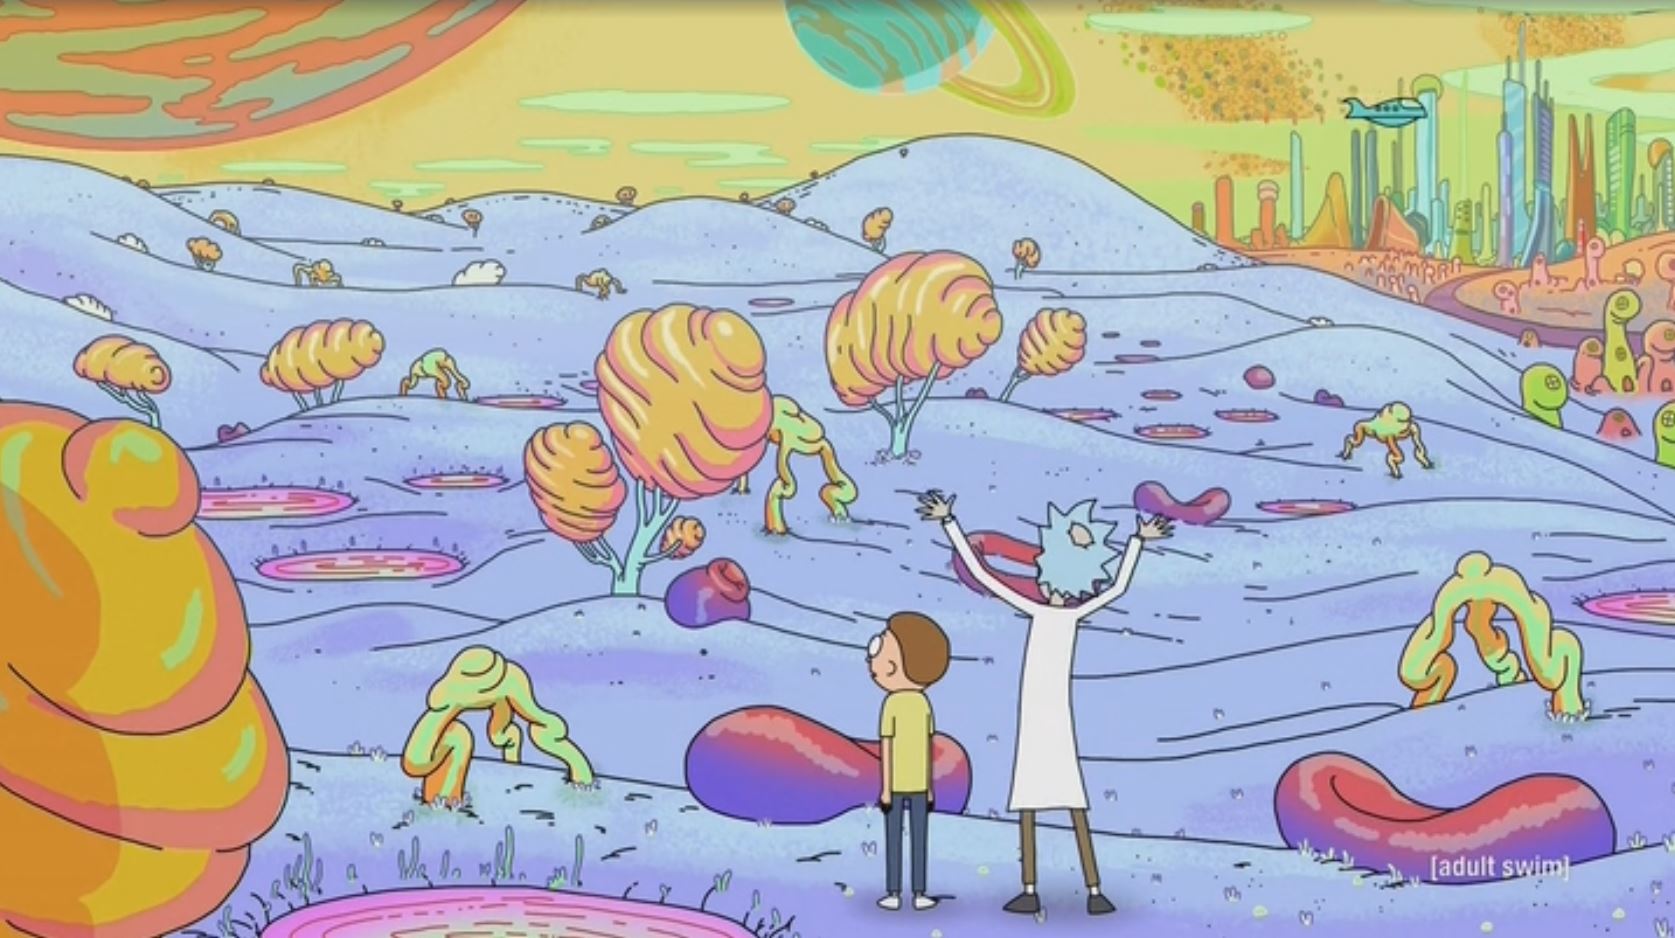 The Weird, Wonderful Worlds of Rick and Morty - Overmental